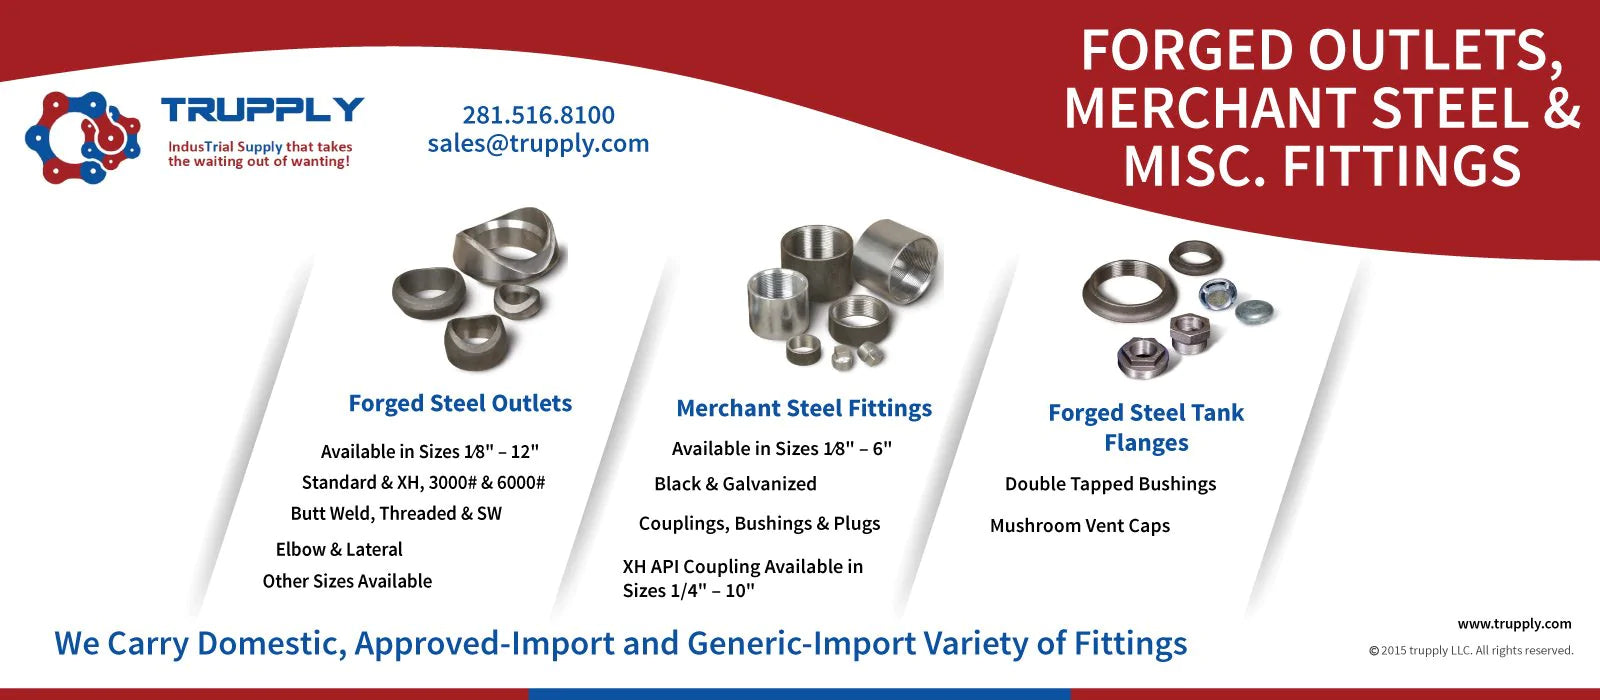 Forged Outlets, Merchant Steel & Misc. Fittings - Trupply